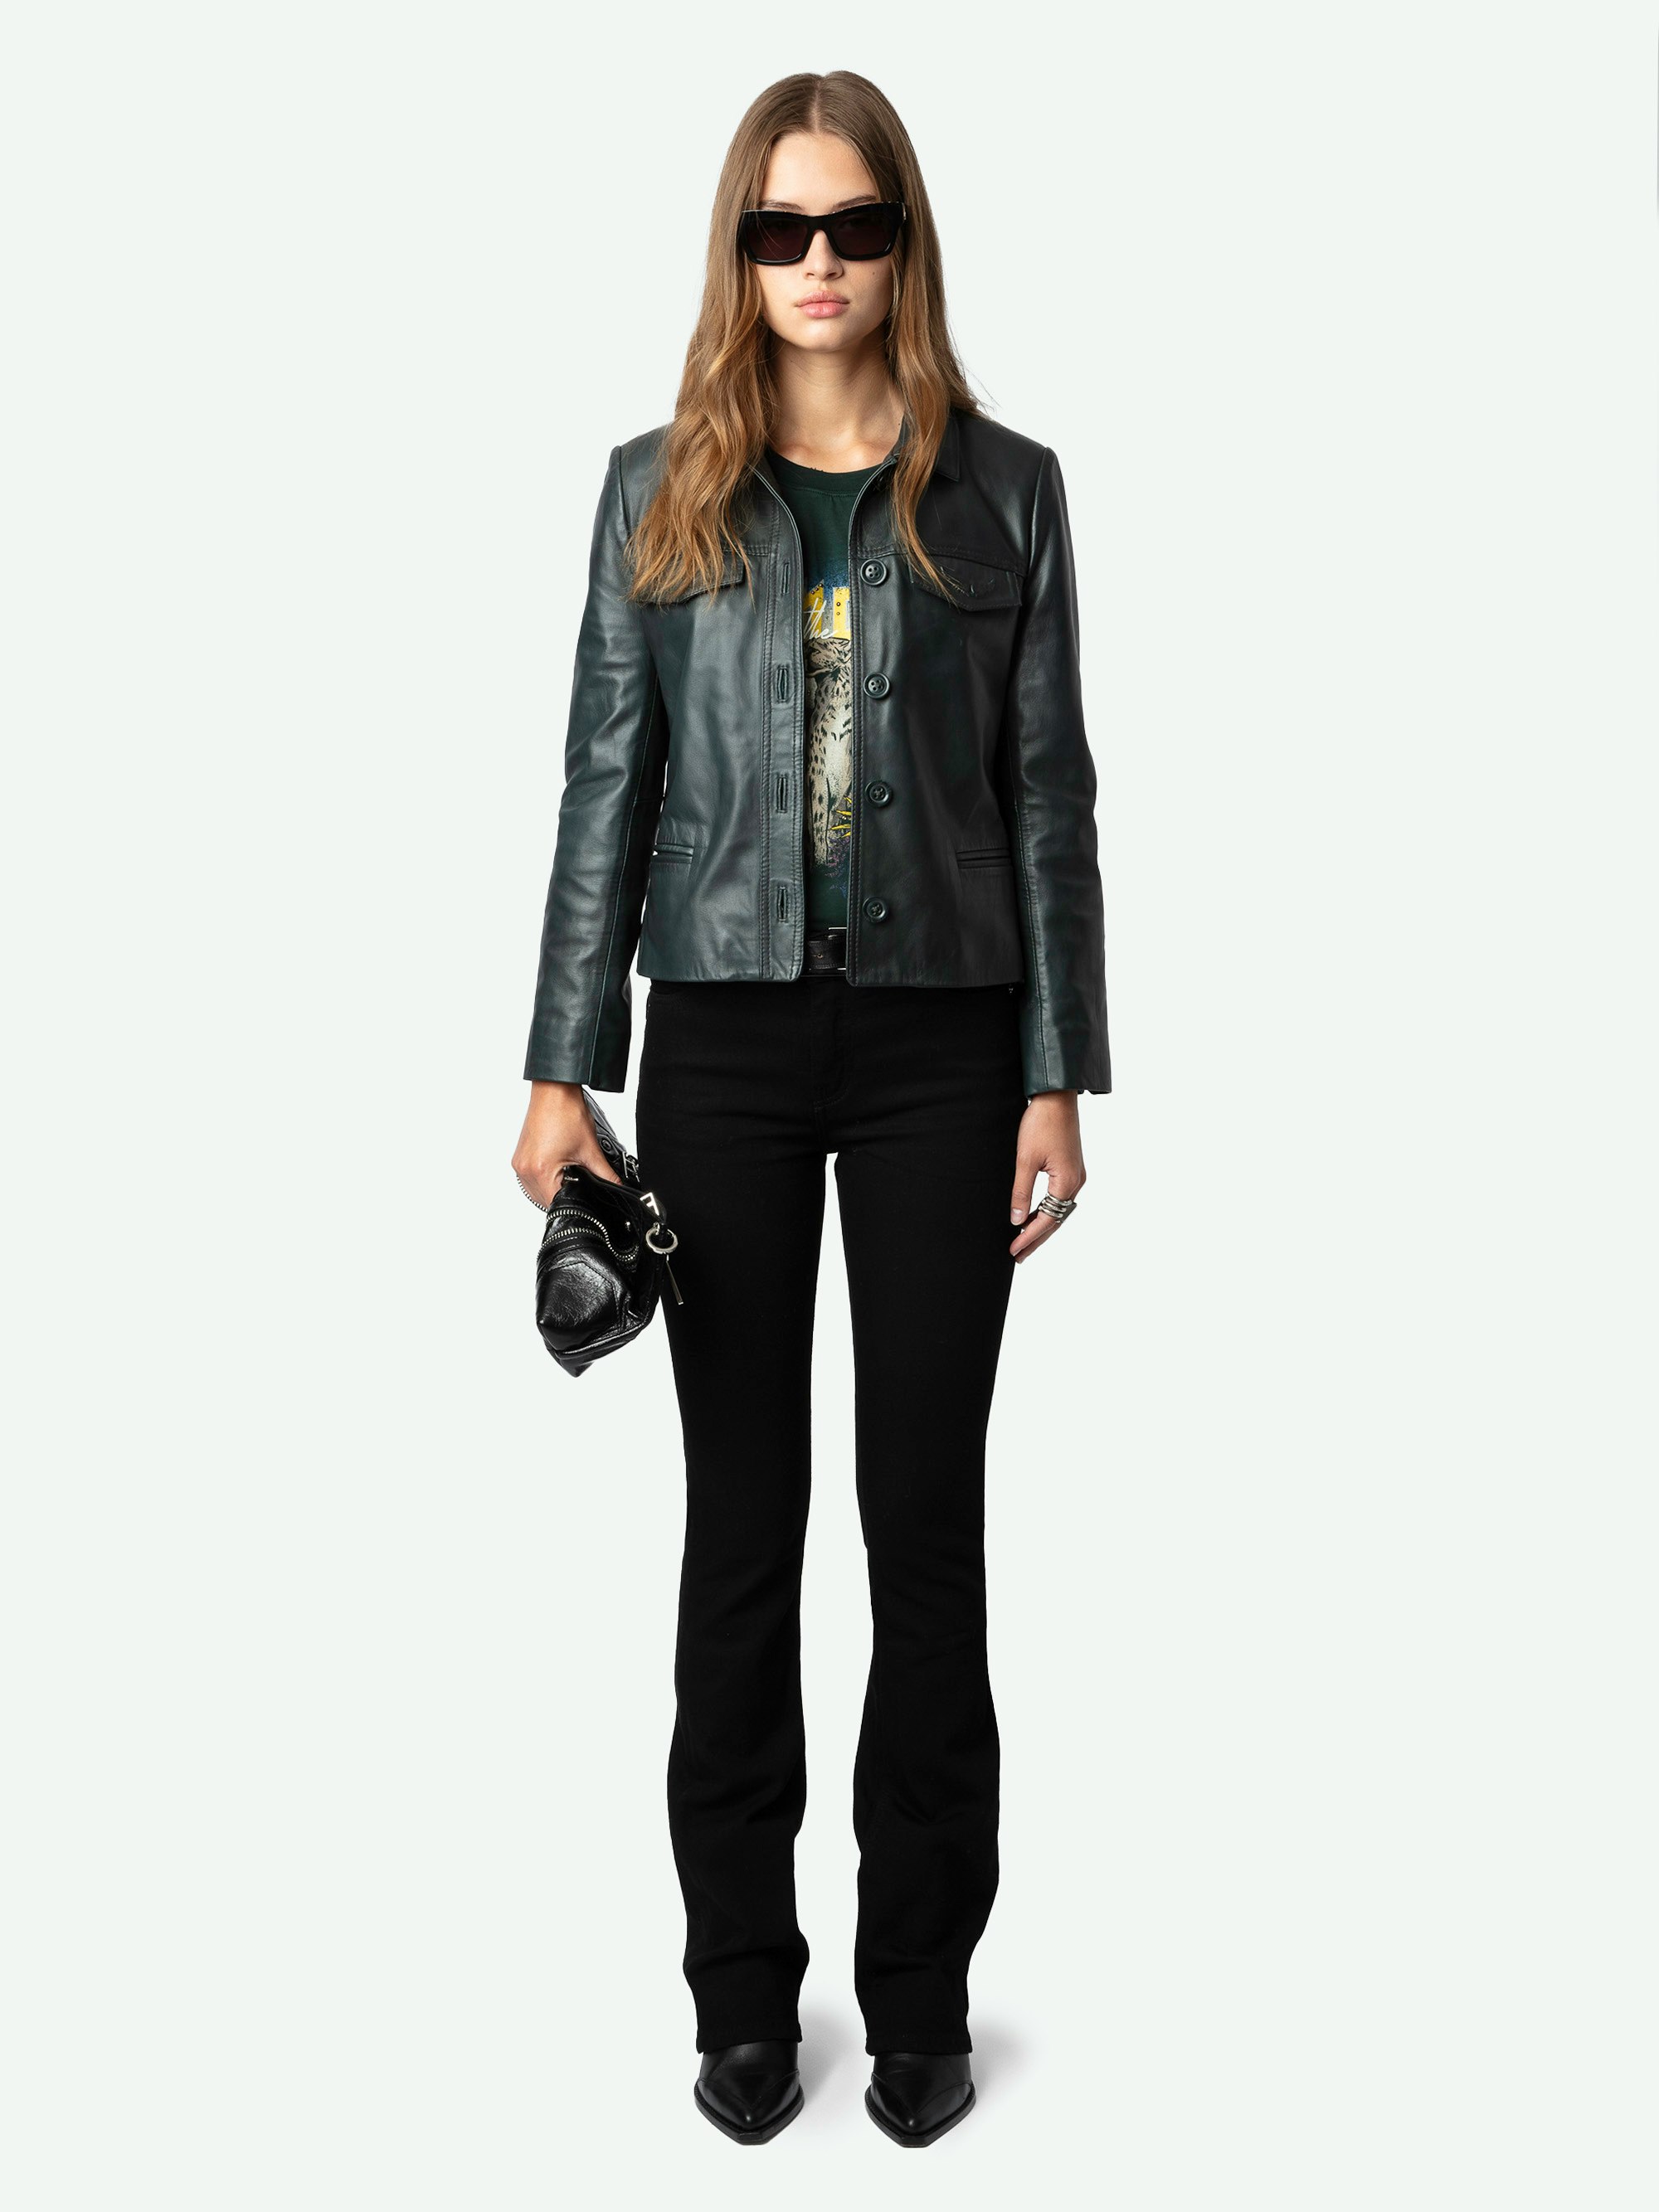 Liam Leather Jacket - Dark green smooth leather jacket with button fastening and pockets.